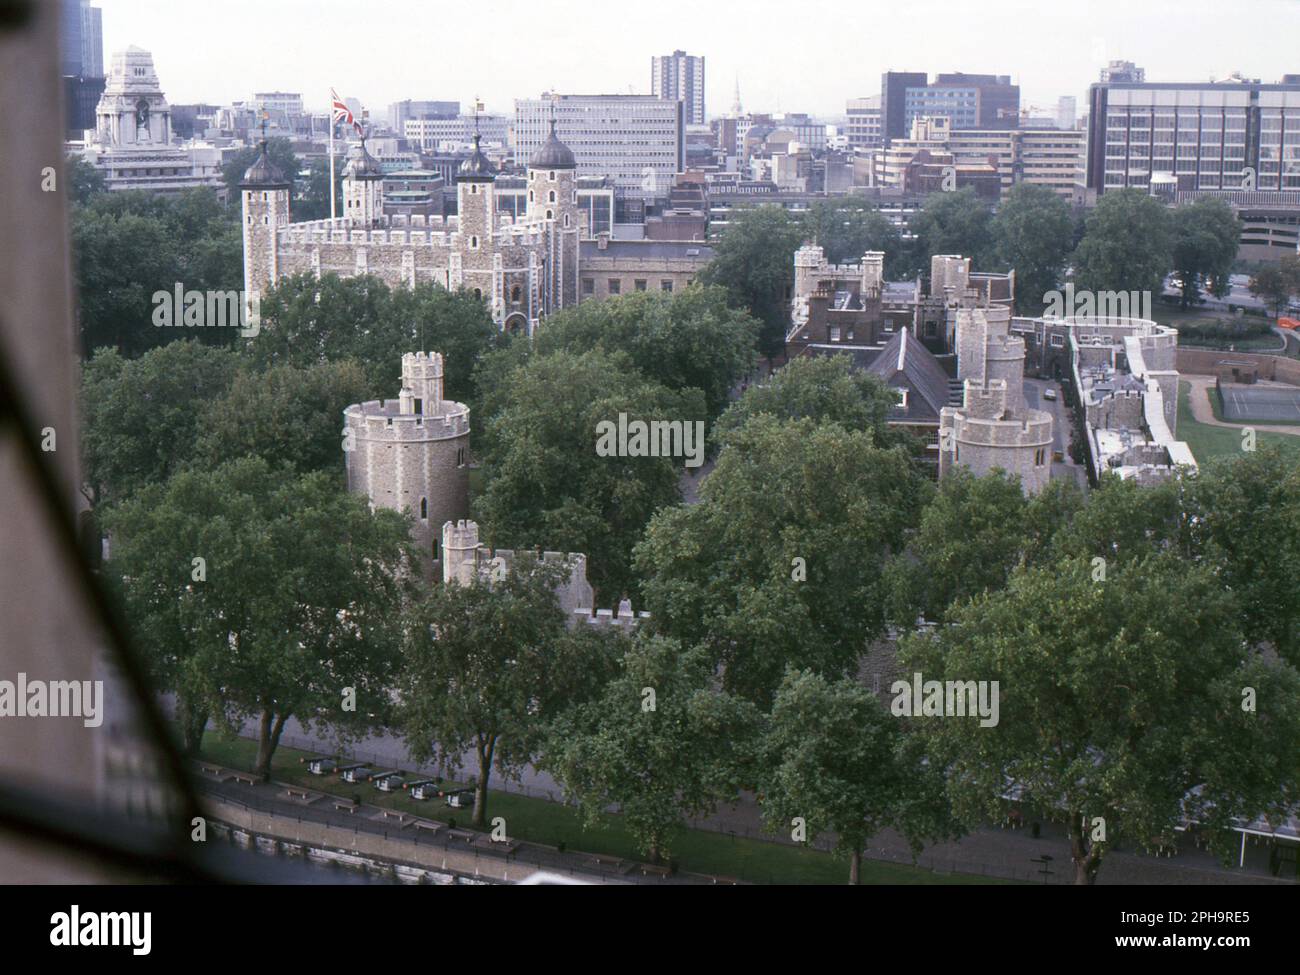 London. 1984. A view of the Tower of London from the upper footway of Tower Bridge, spanning the River Thames in London, England. Visible to the left is the Port of London Authority Building, 10 Trinity Square at Tower Hill, the former headquarters of the Port of London Authority. Stock Photo